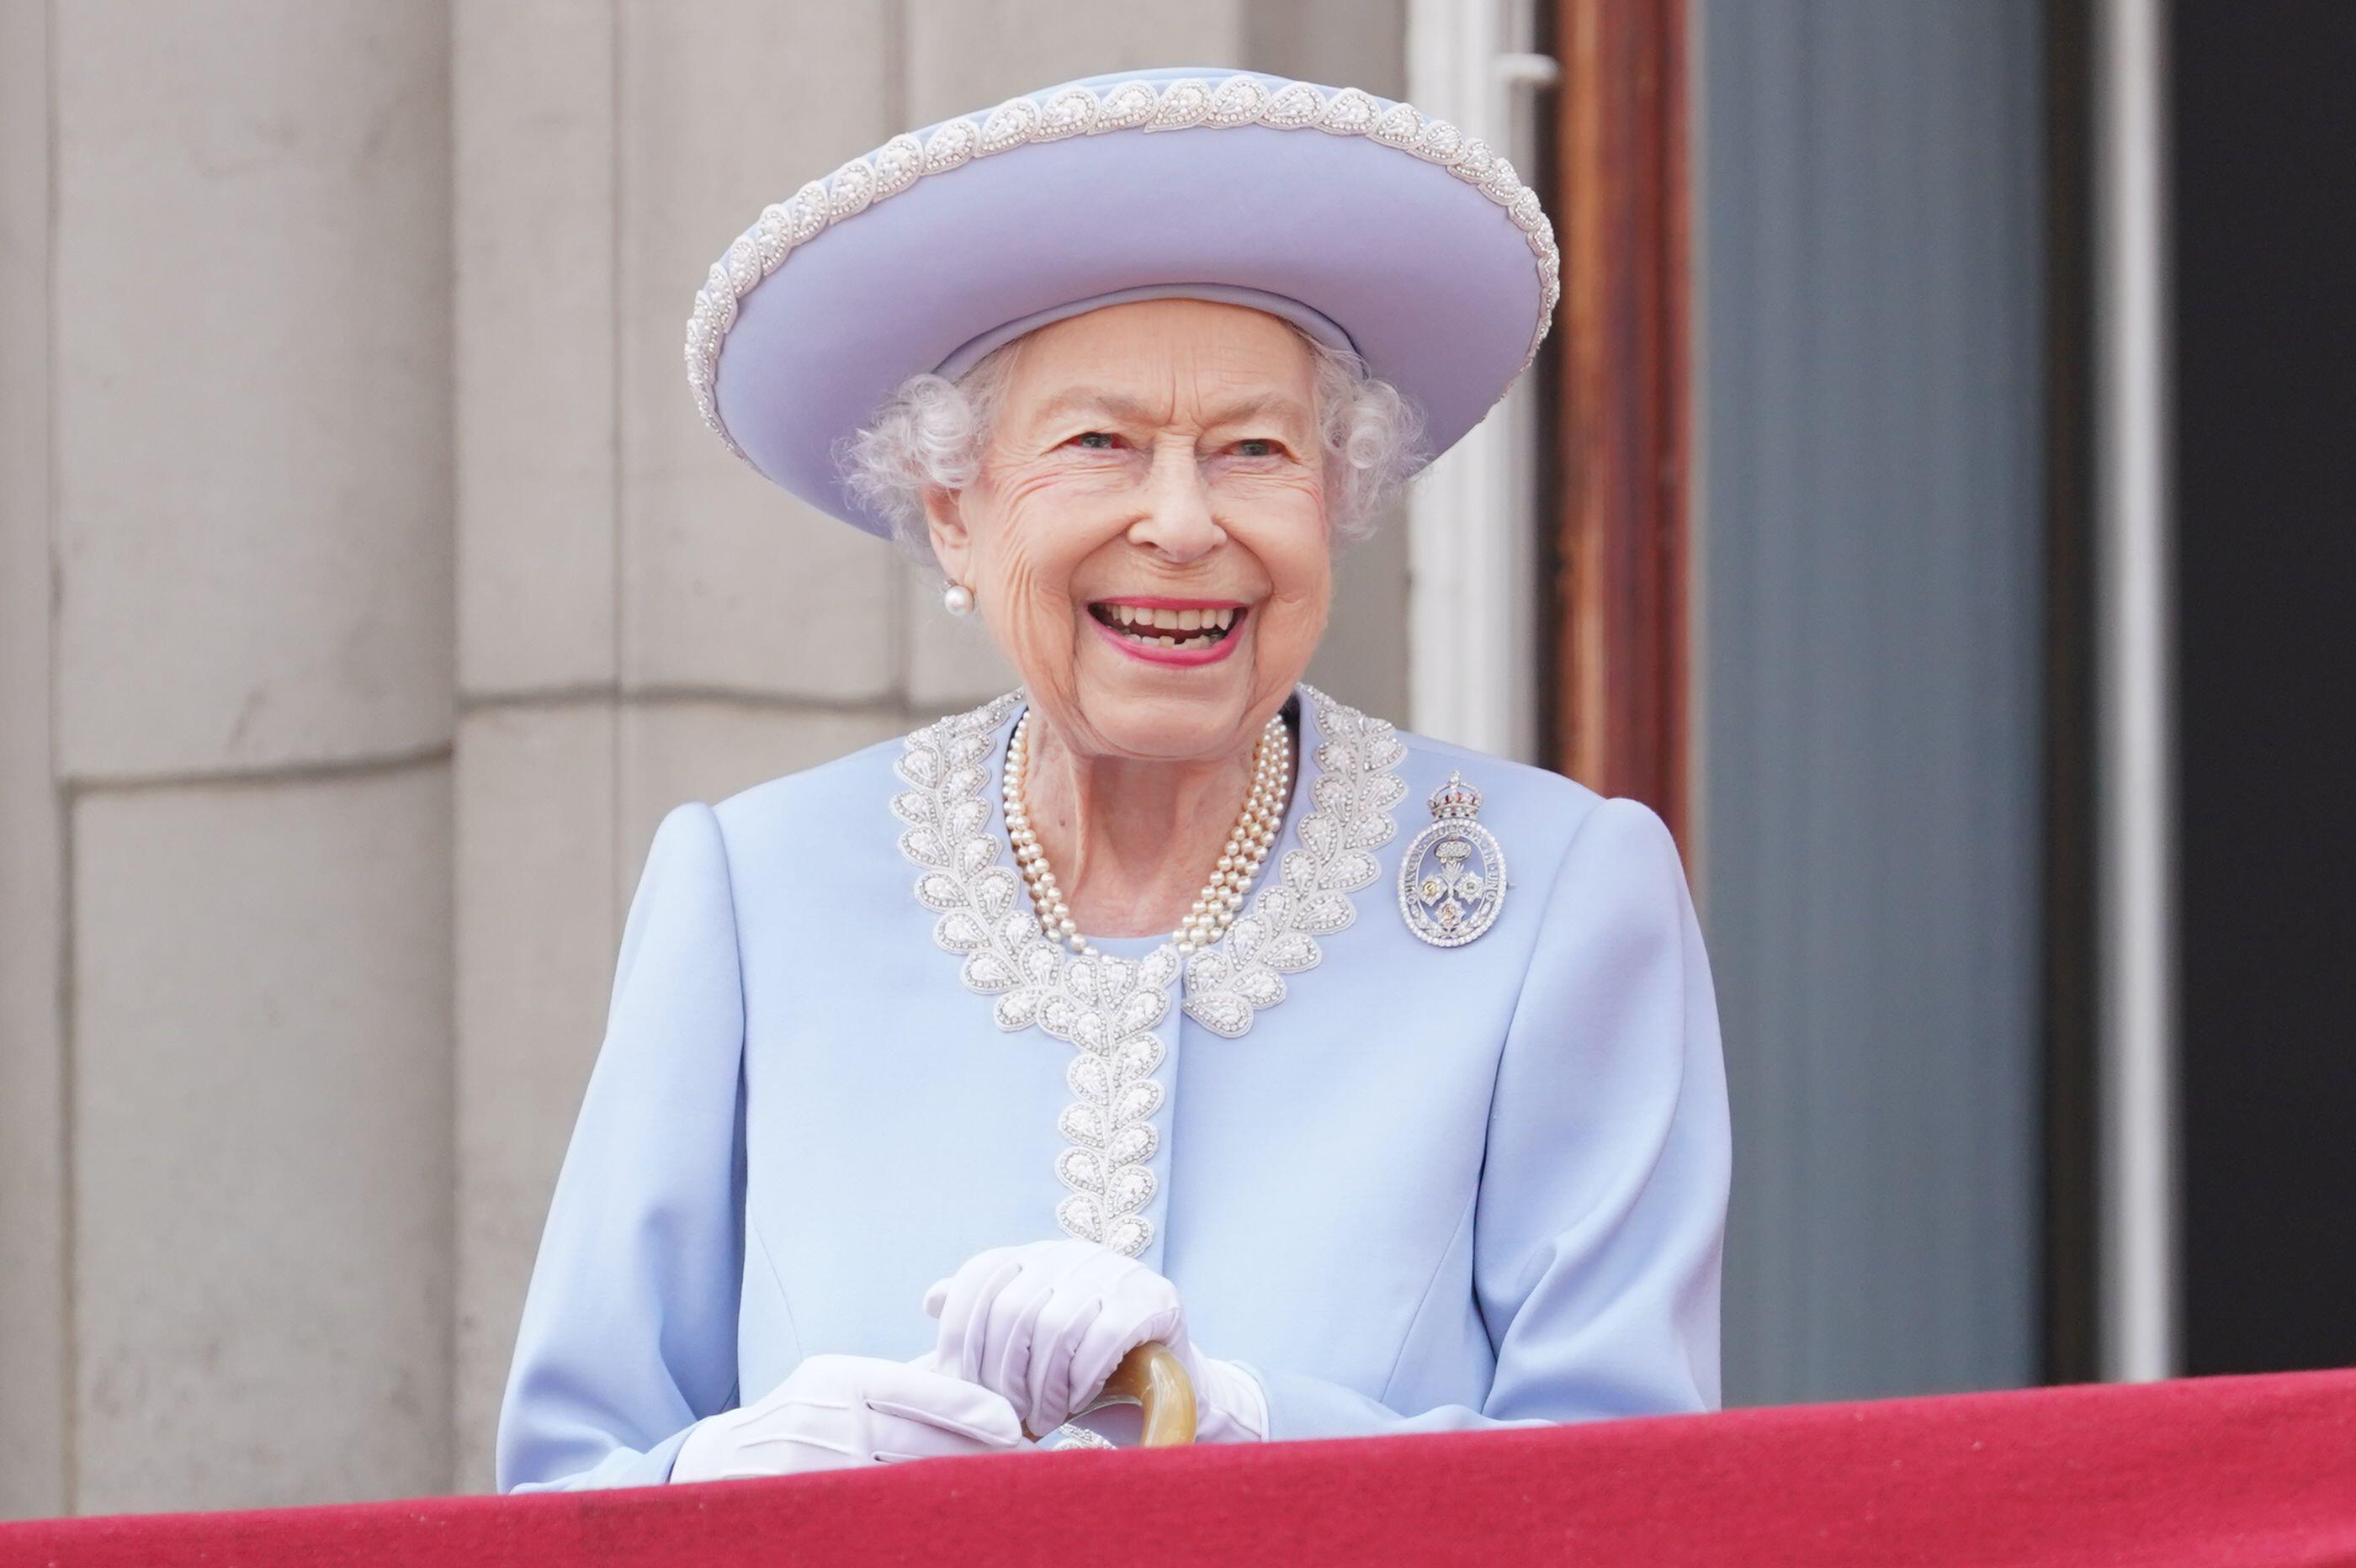 The Queen at her Platinum Jubilee